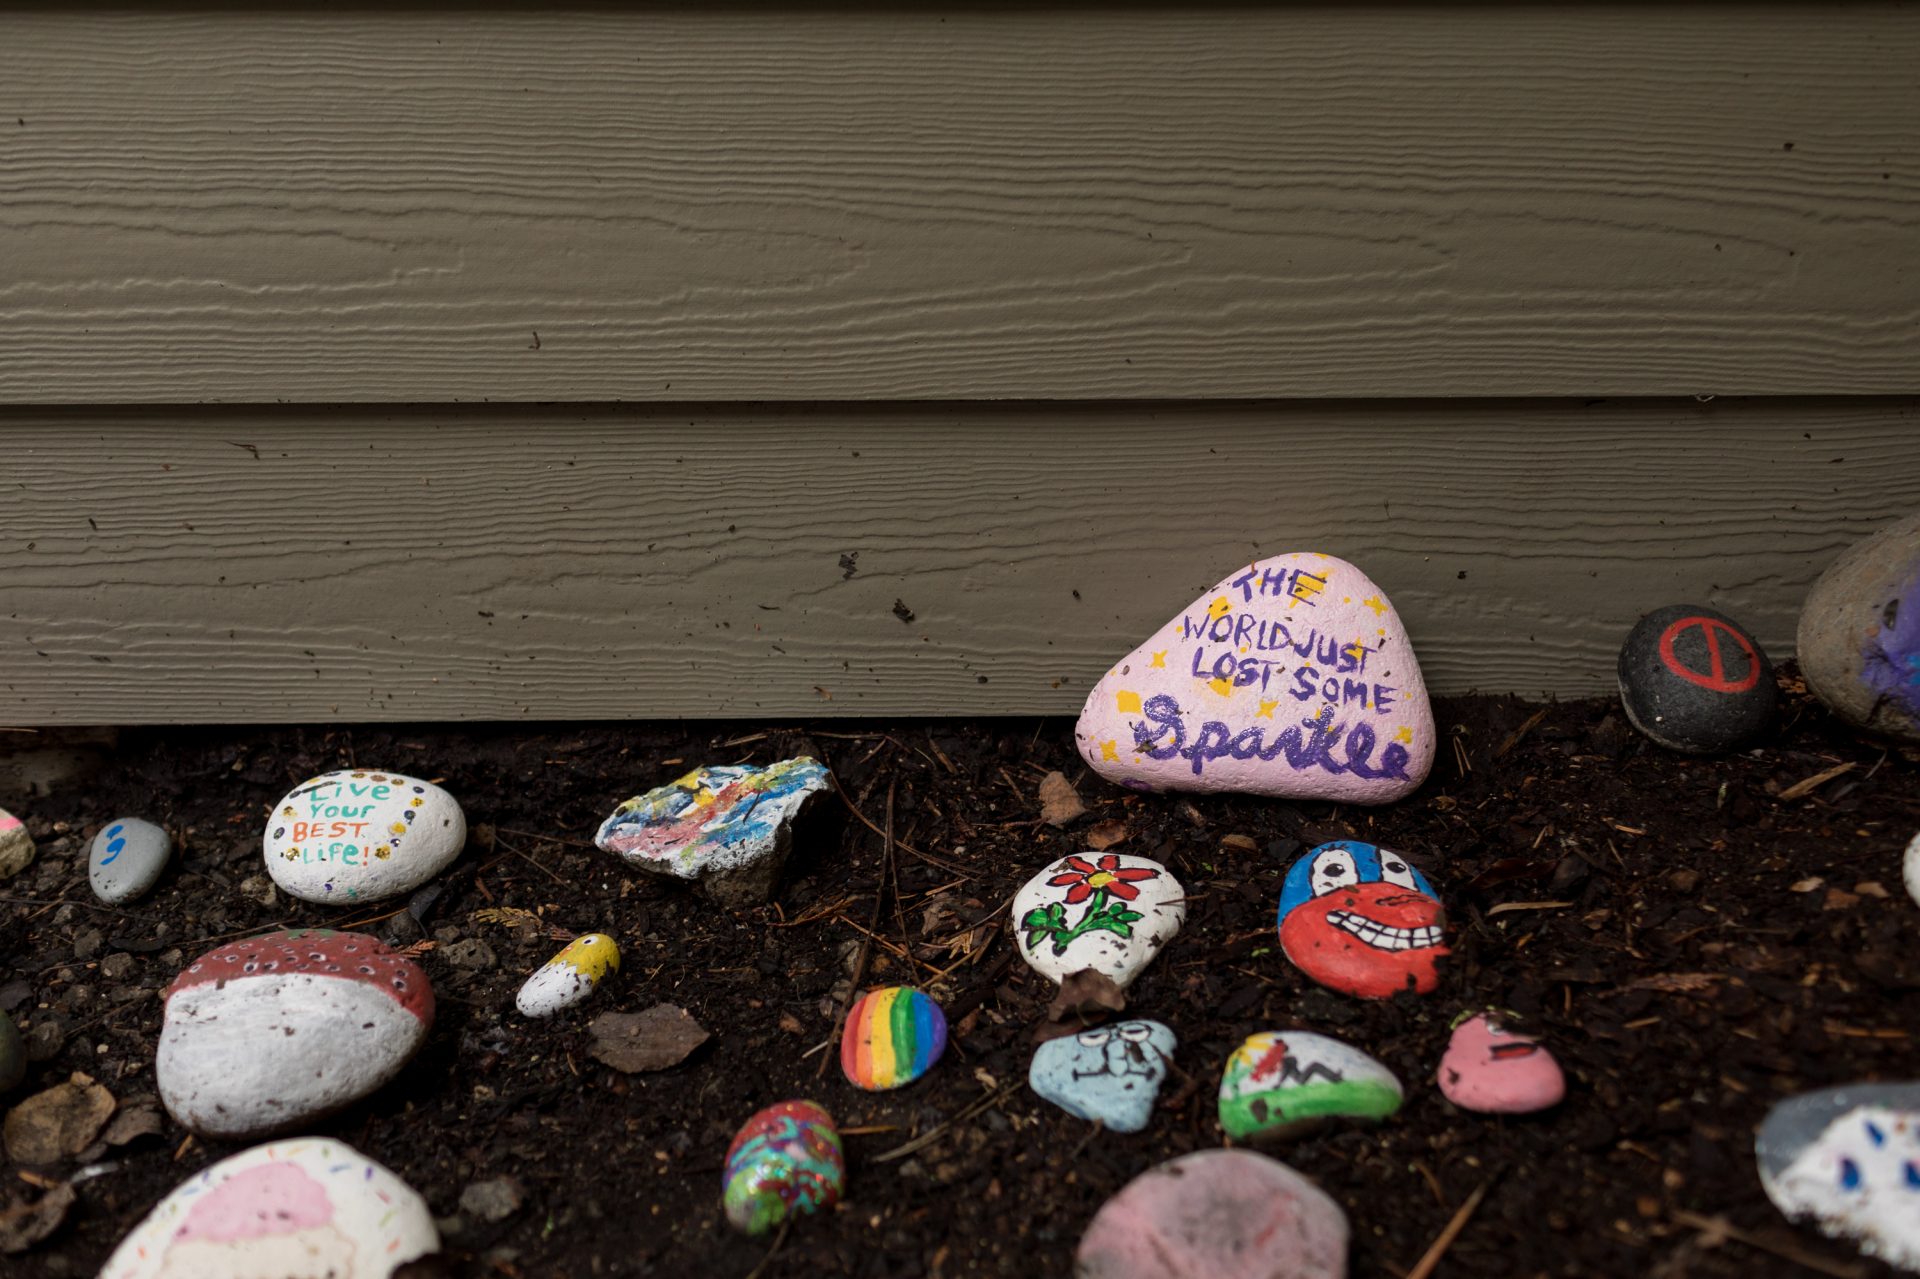 Painted rocks sit outside Sarah McSweeney's group home in Oregon City, Ore., on Nov. 24, 2020. McSweeney's housemates painted a rock to read "The World Just Lost Some Sparkle" in pink and purple after McSweeney's death.